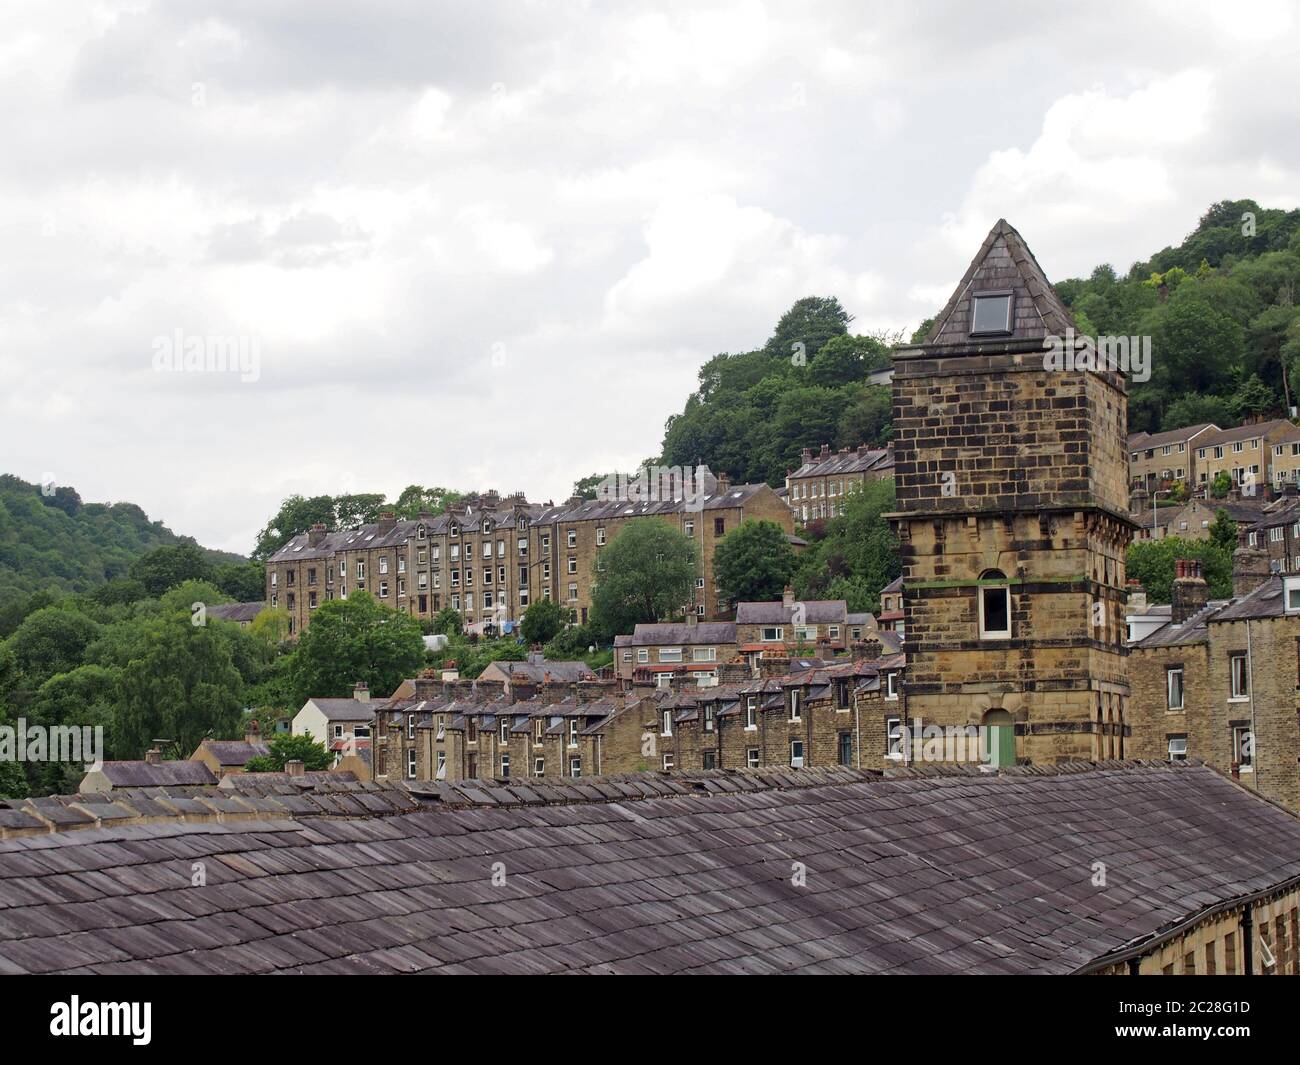 a view of the steep hillside streets in hebden bridge between summer trees with the tower of the historic nutclough mill buildin Stock Photo